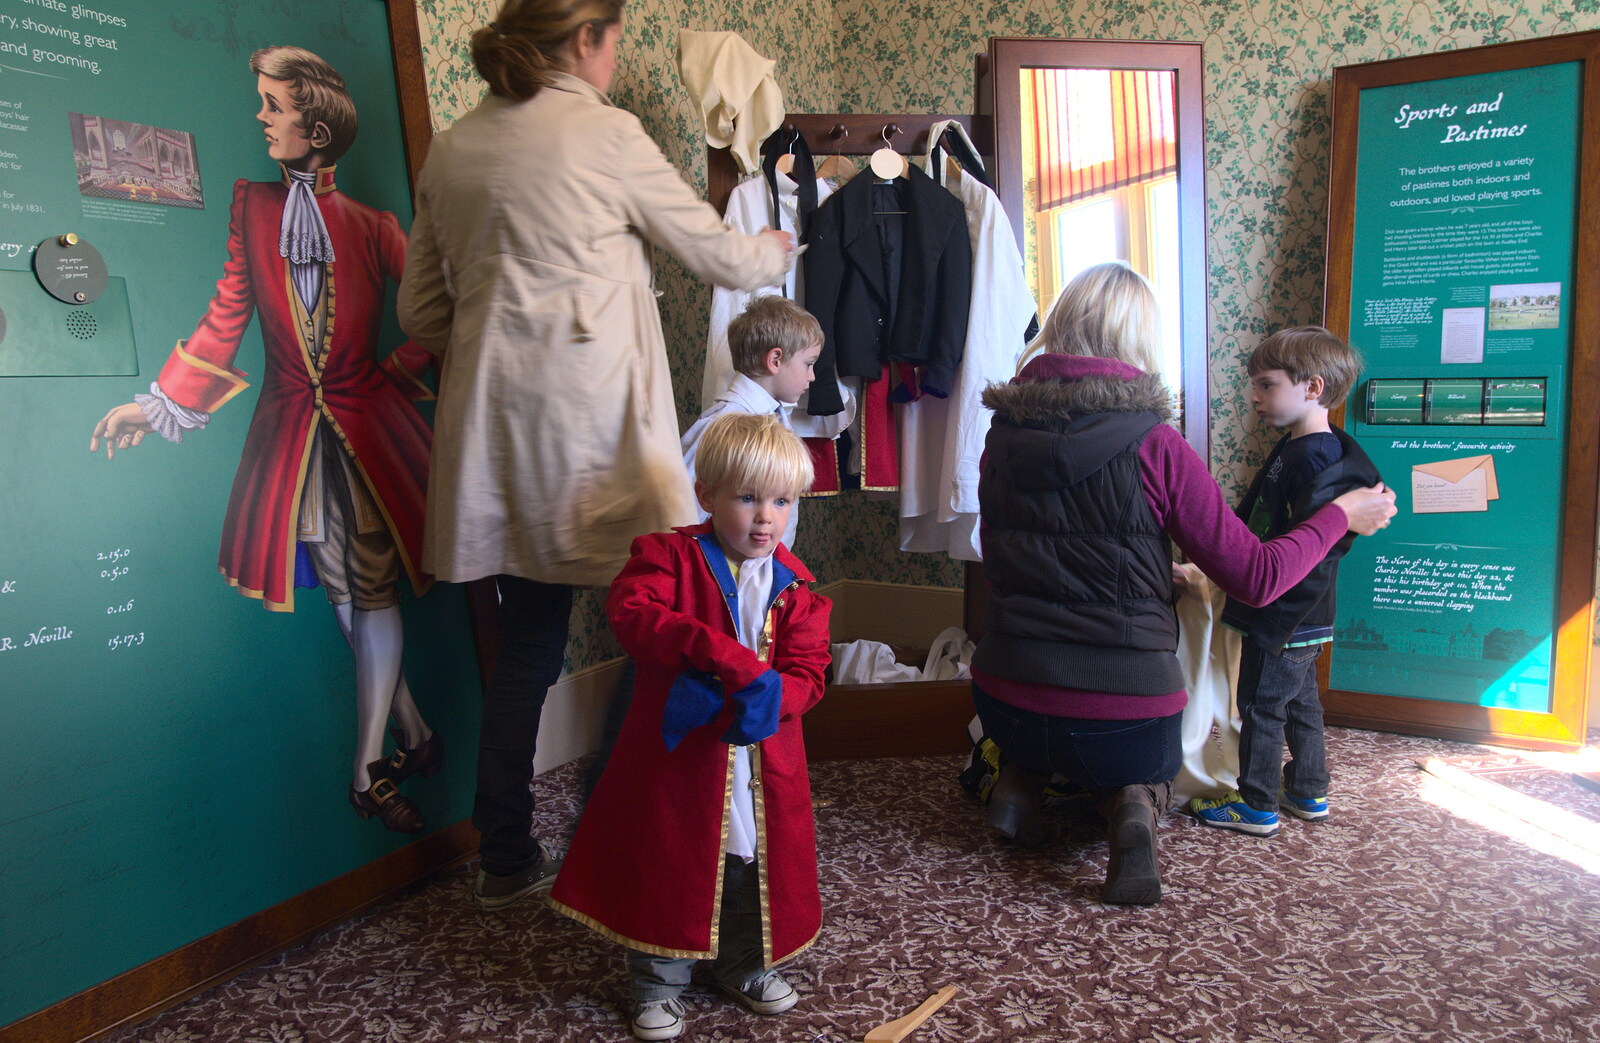 Harry dresses up as Little Lord Fauntleroy from A Trip to Audley End House, Saffron Walden, Essex - 16th April 2014